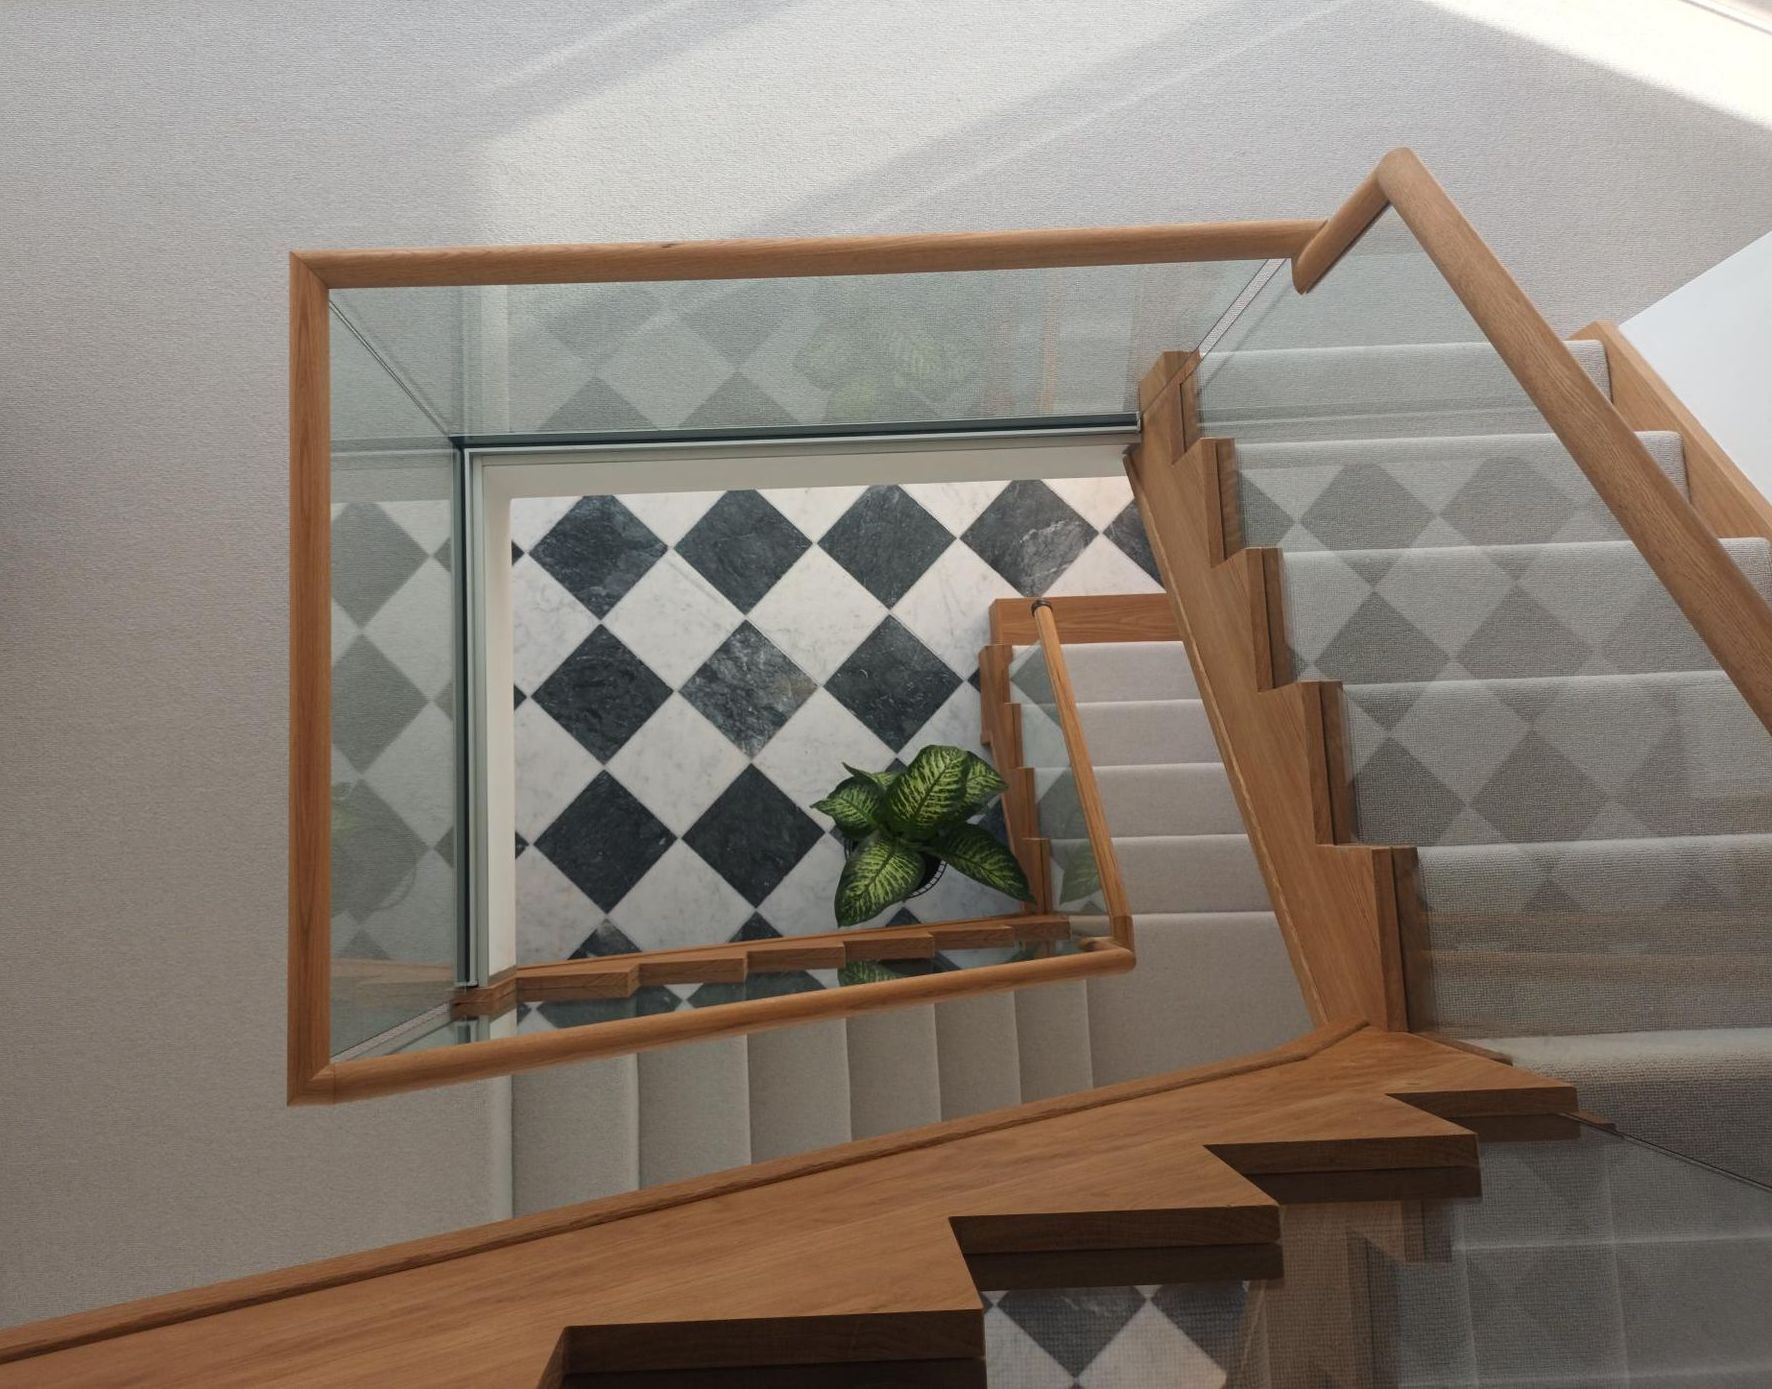 Imitation cut string staircase with glass balustrade